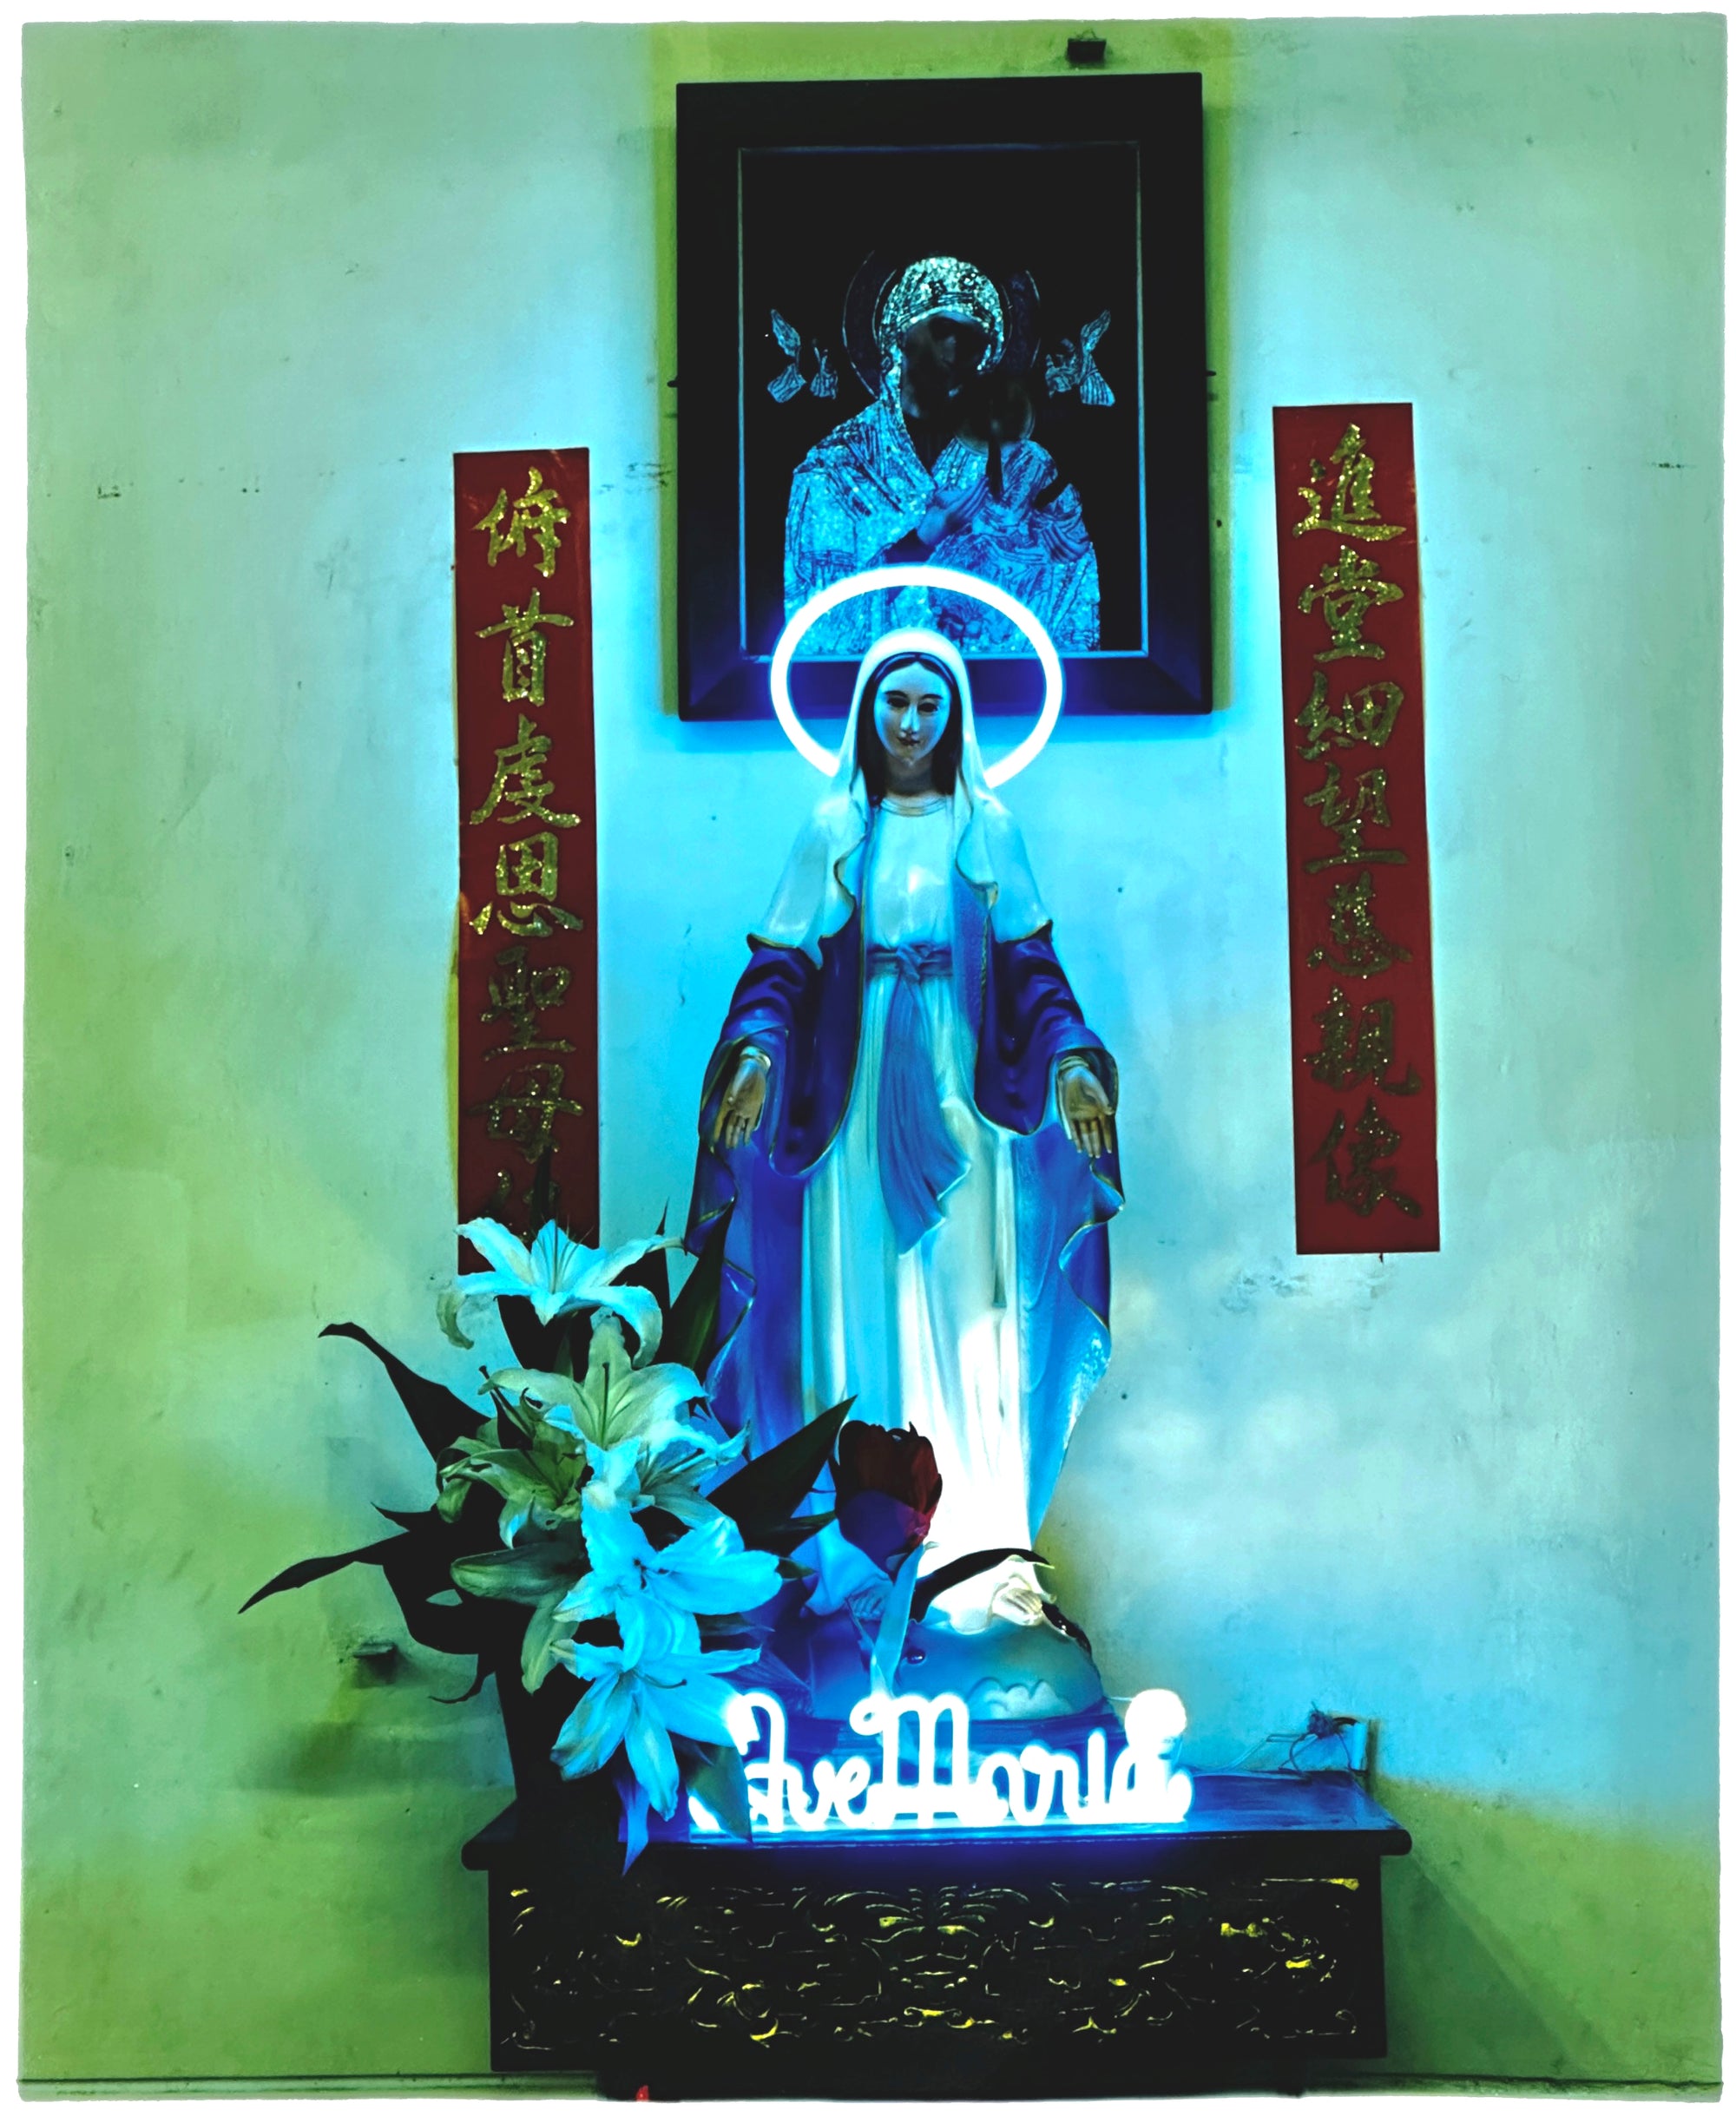 Photograph by Richard Heeps. Ave Maria, with a neon halo and name 'Ave Maria' at her feet. The neon tones the photo in green and blue.